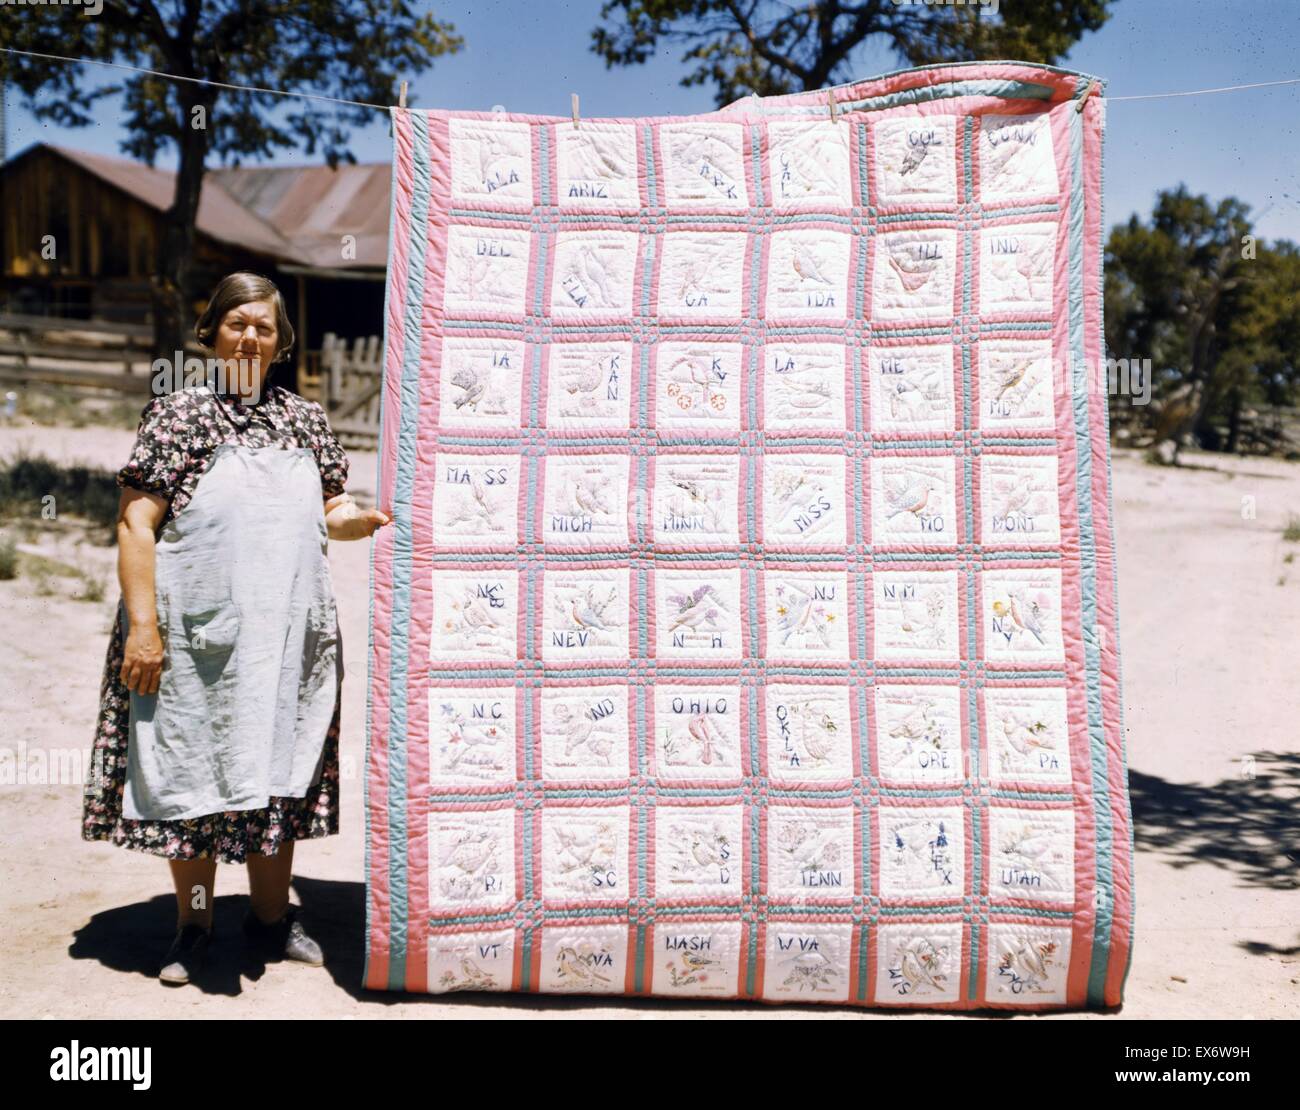 Mrs. Bill Stagg with state quilt Pie Town, New Mexico. A community settled by about 200 migrant Texas and Oklahoma farmers who filed homestead claims. Mrs Stagg helps her husband in the field with ploughing, planting, weeding and harvesting. She quilts du Stock Photo